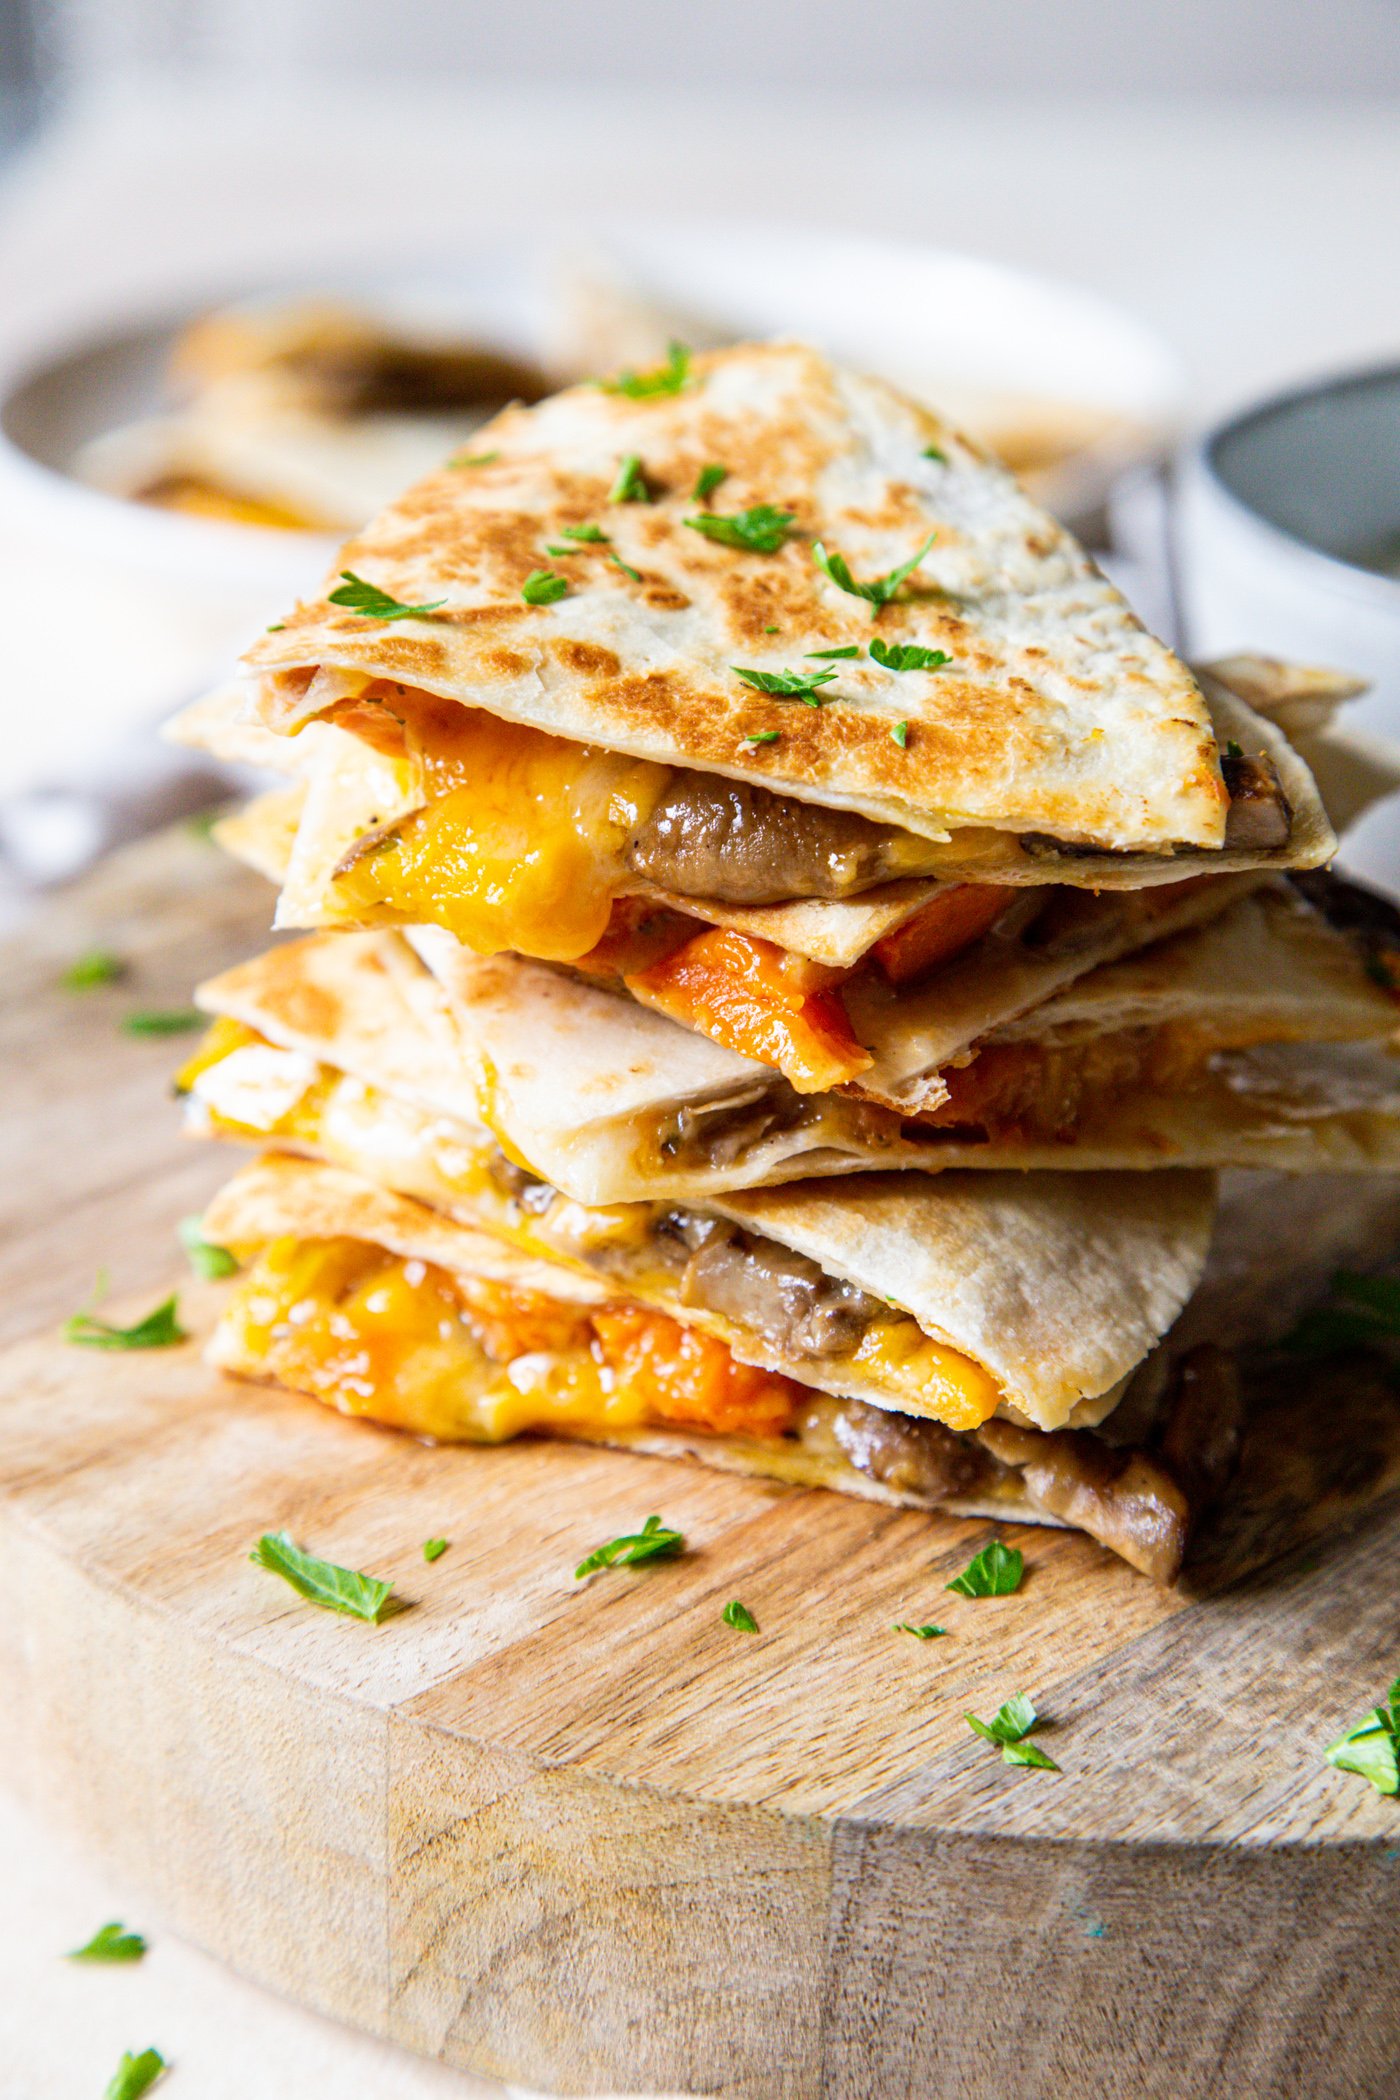 Steak Mushroom and Squash Quesadilla is a luxury leftover dream recipe! With melty cheese, savory sirloin steak, buttery mushrooms, and butternut squash